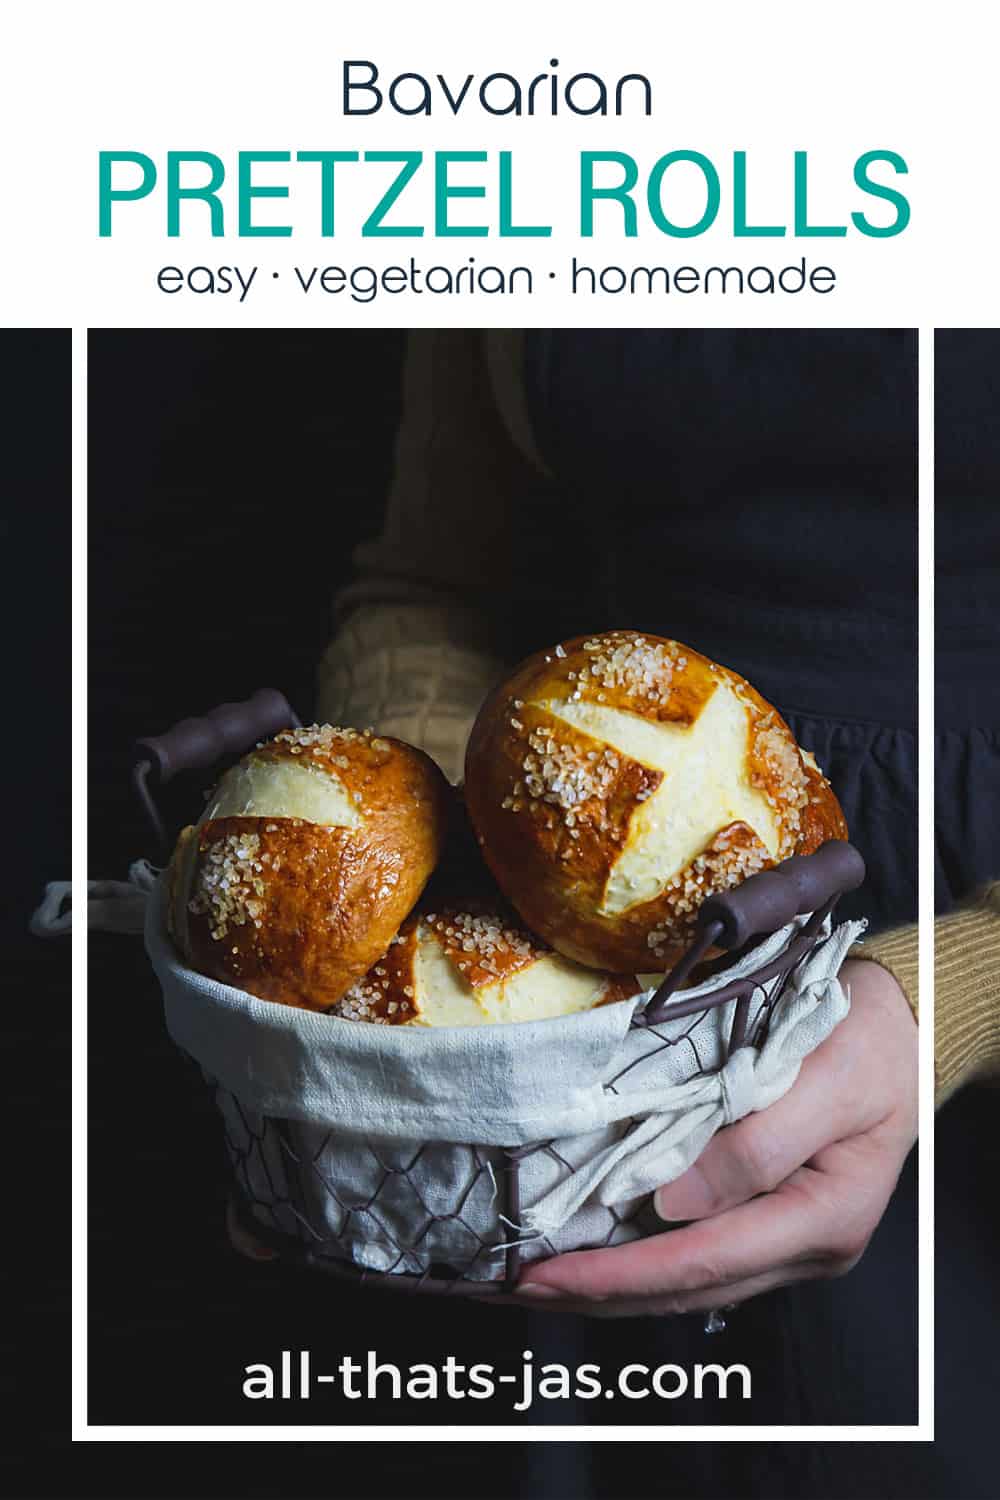 A person holding a basket with pretzel rolls and text overlay.